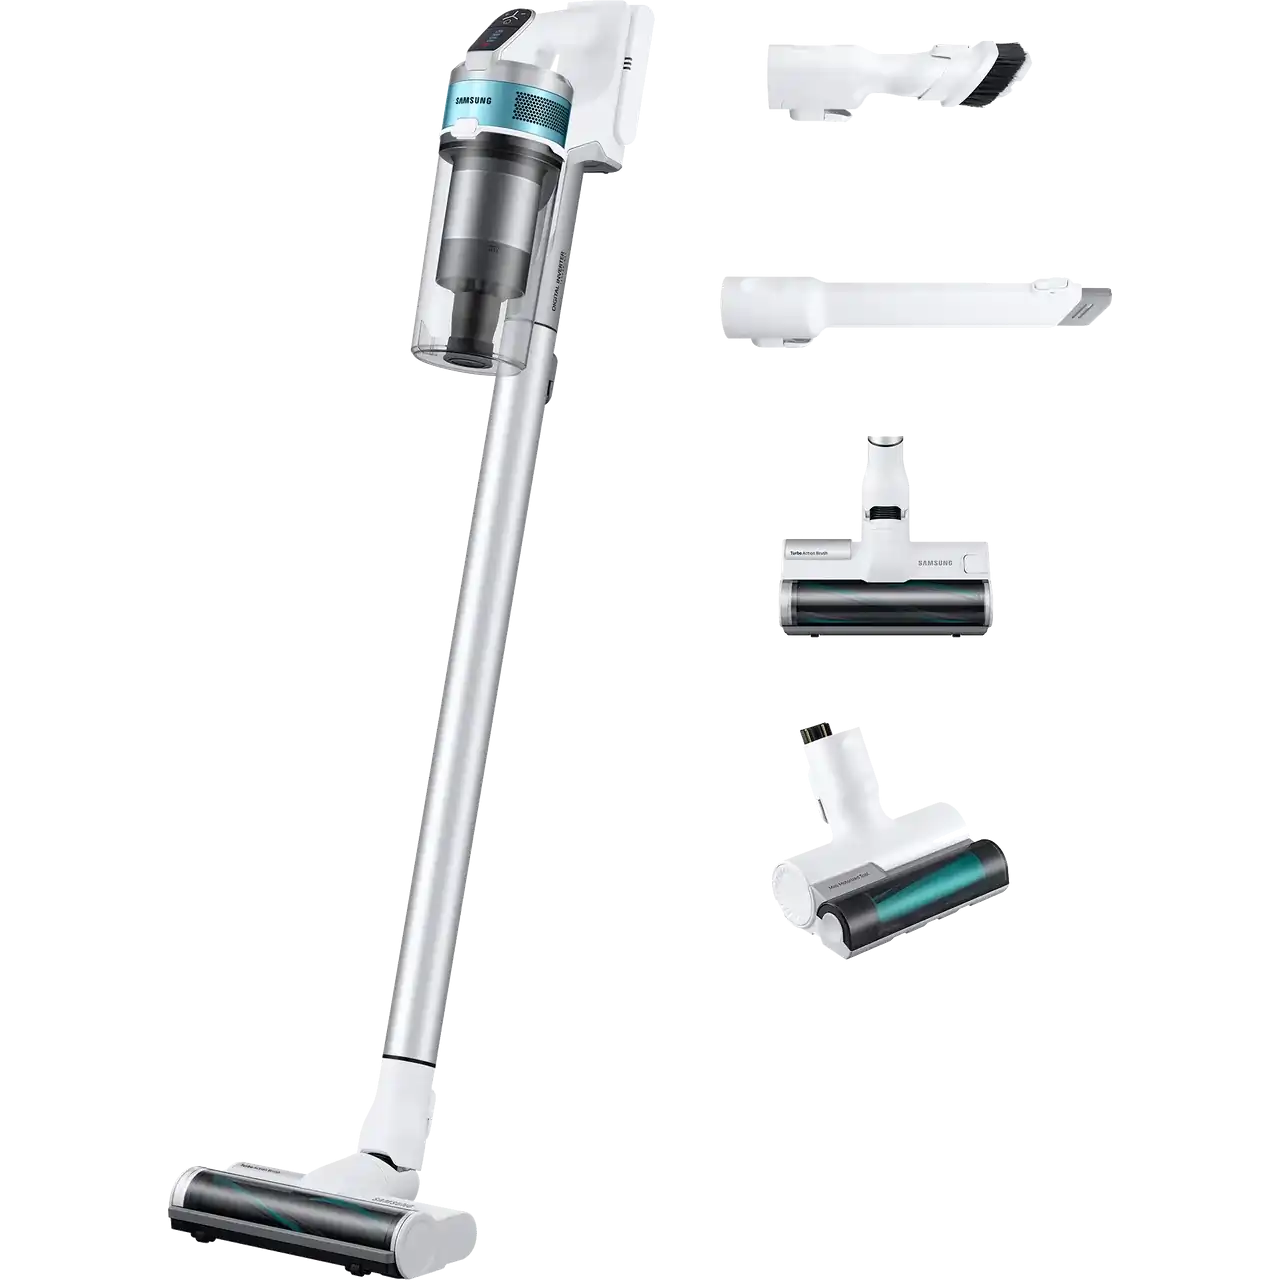 Samsung Jet™ 70 Pet VS15T7032R1 Cordless Vacuum Cleaner with up to 40 Minutes Run Time - White / Green | Atlantic Electrics